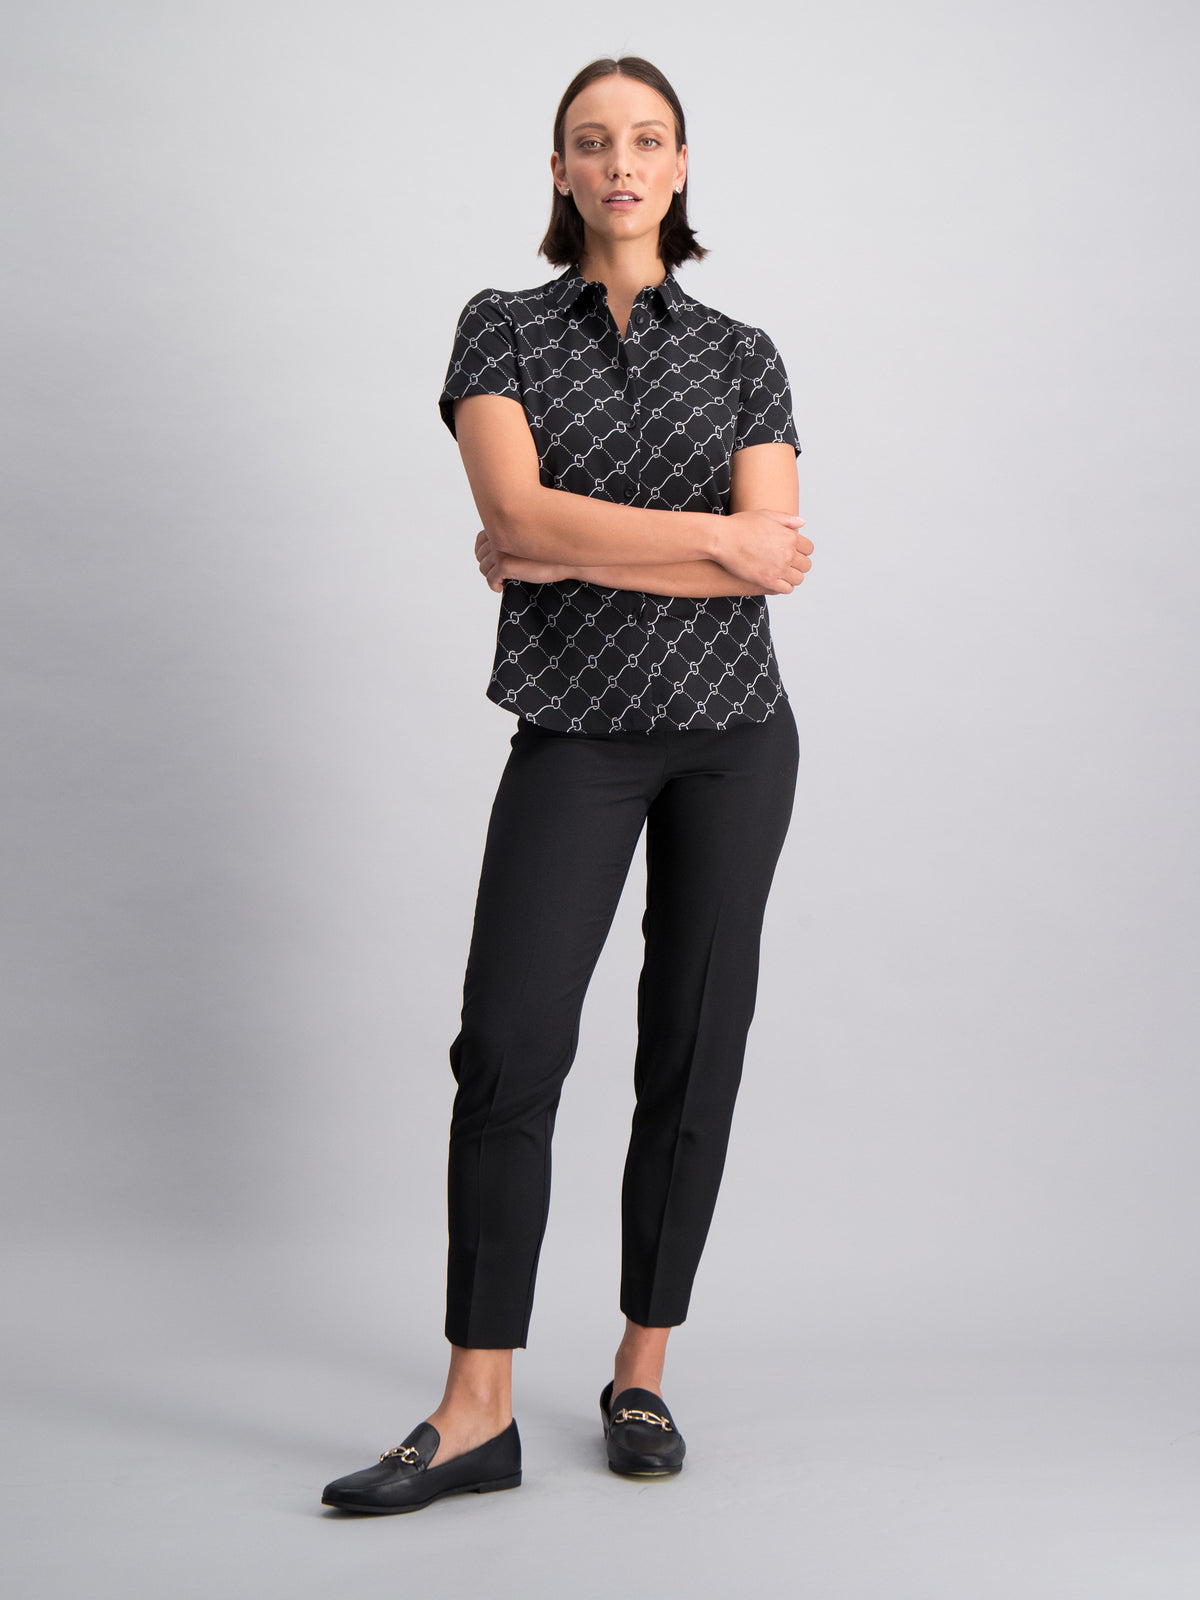 Carrie classic buttoned shirt - black/white